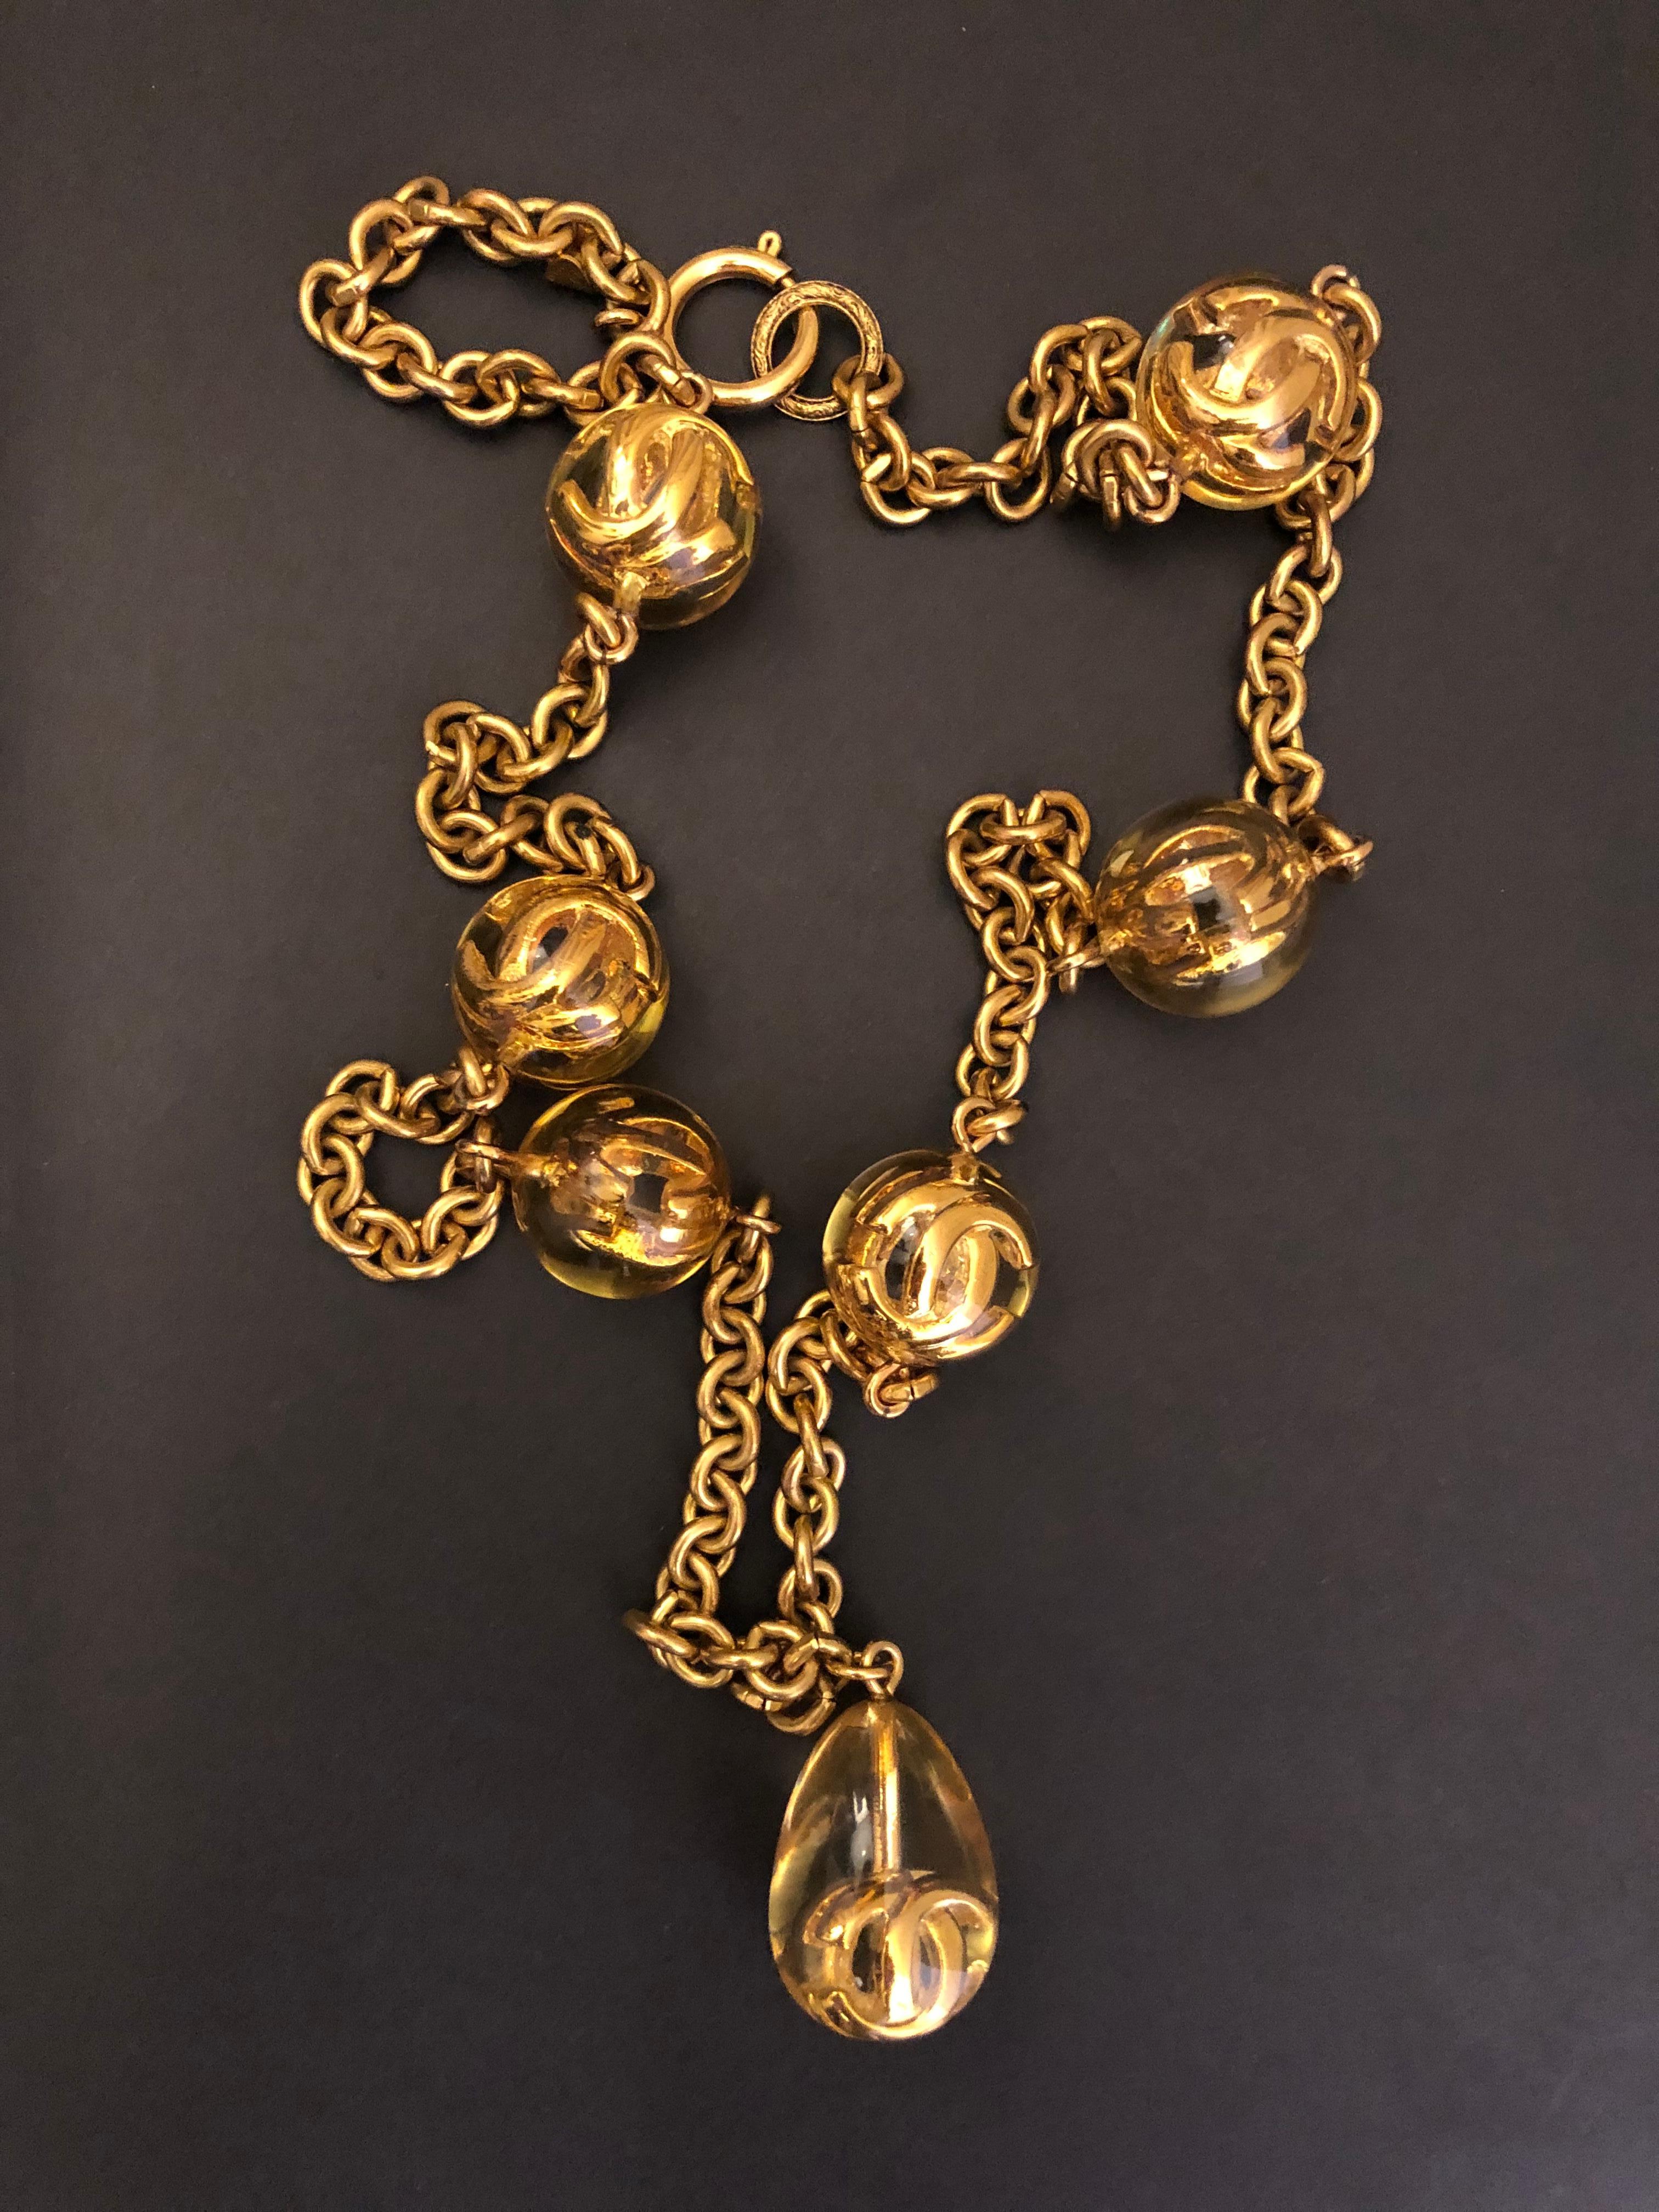 Vintage Chanel gold toned chain necklace featuring six gold toned CC logos in clear resin spheres and centered a gold toned CC logo in clear resin drop pendant. Stamp CHANEL 2 5 made in France. Chain measures approximately 80 cm. Spring ring